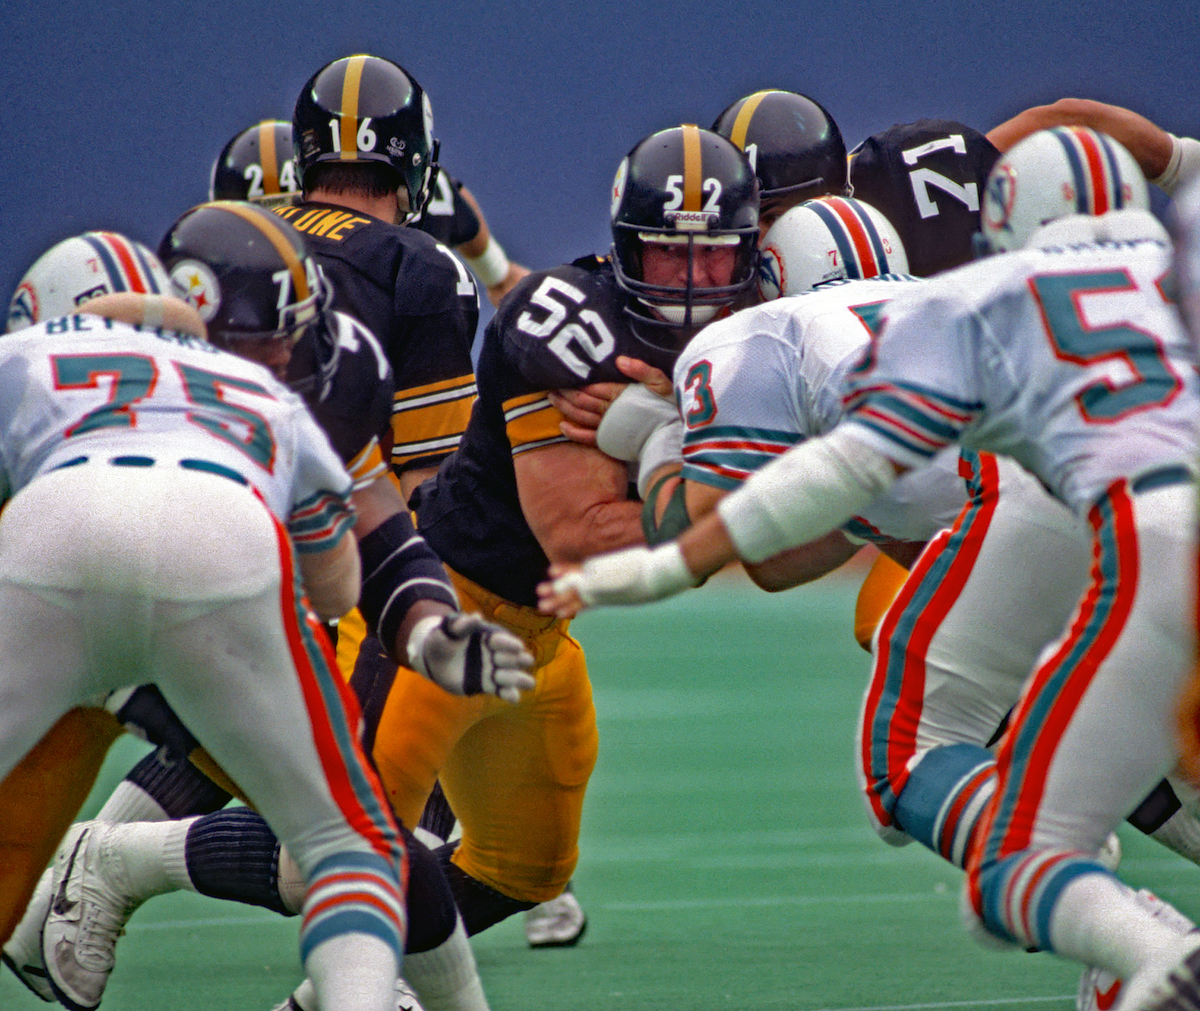 Center Mike Webster of the Pittsburgh Steelers, one of the best NFL centers of all time, blocks Miami Dolphins defensive linemen